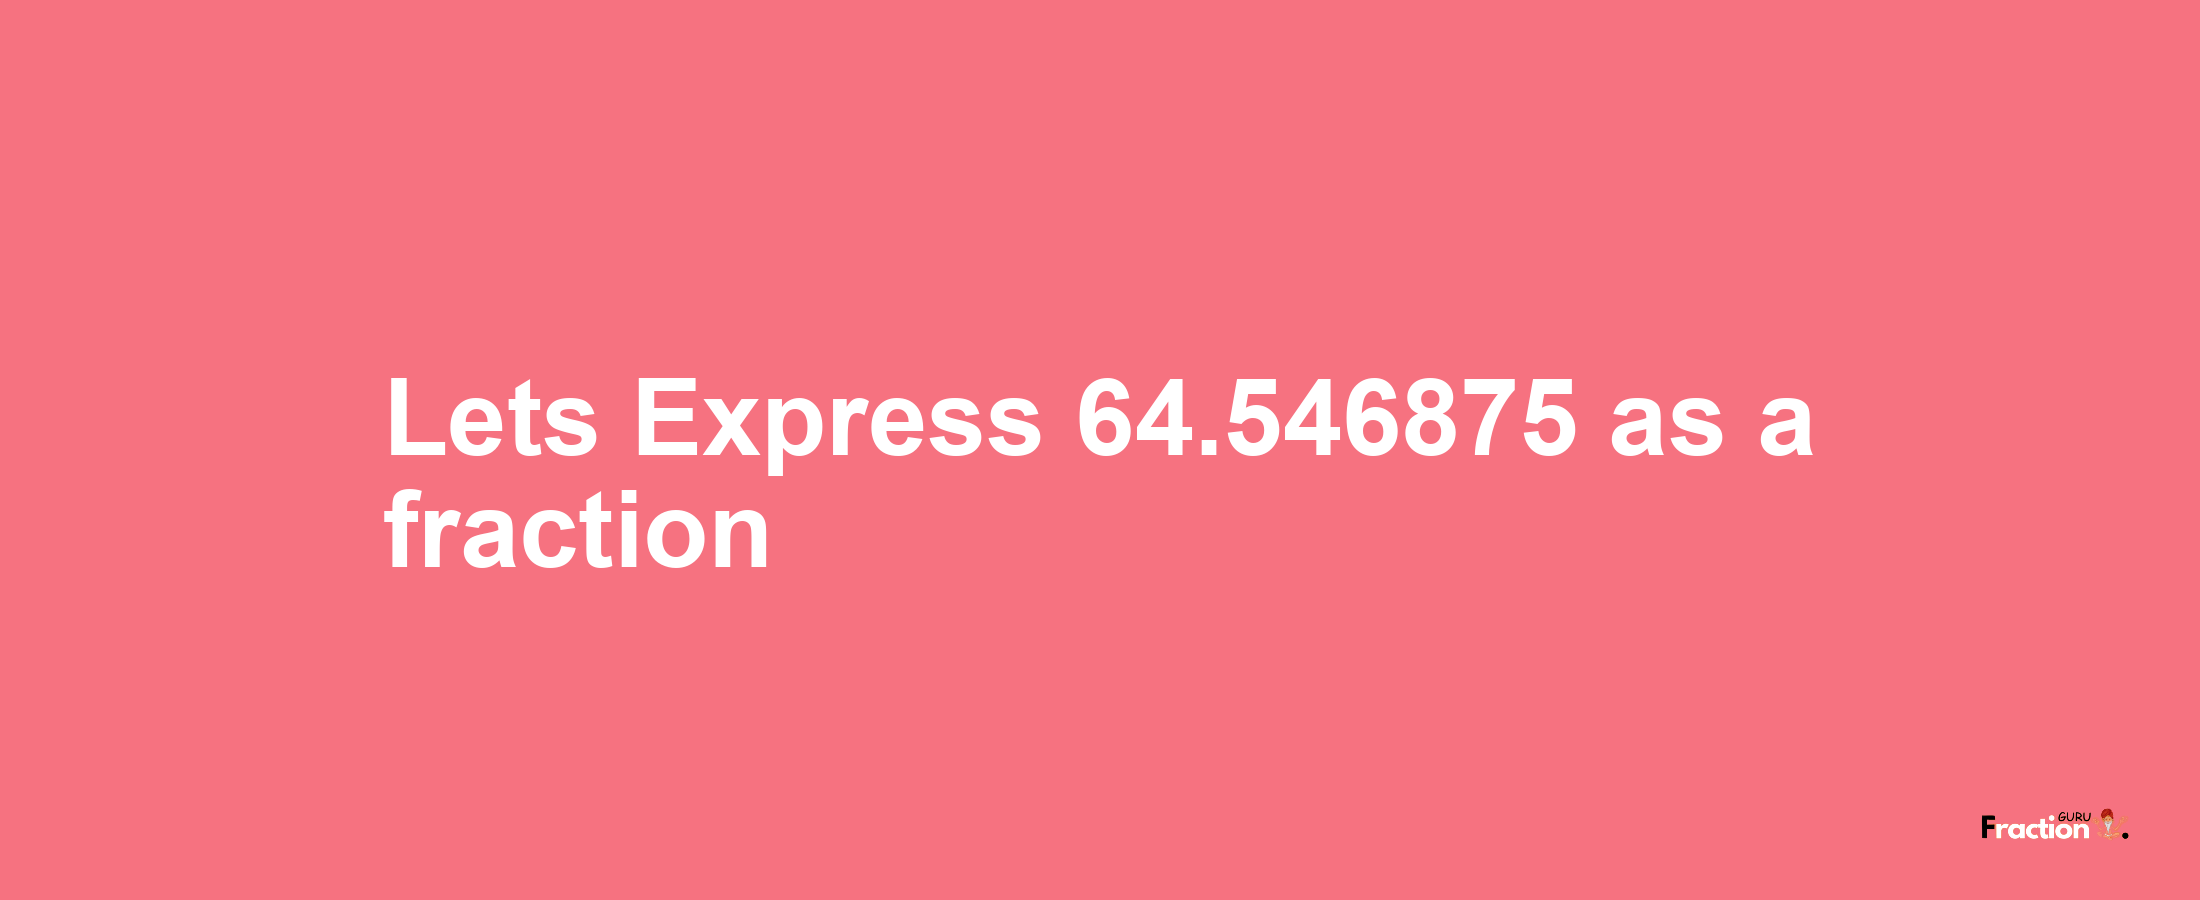 Lets Express 64.546875 as afraction